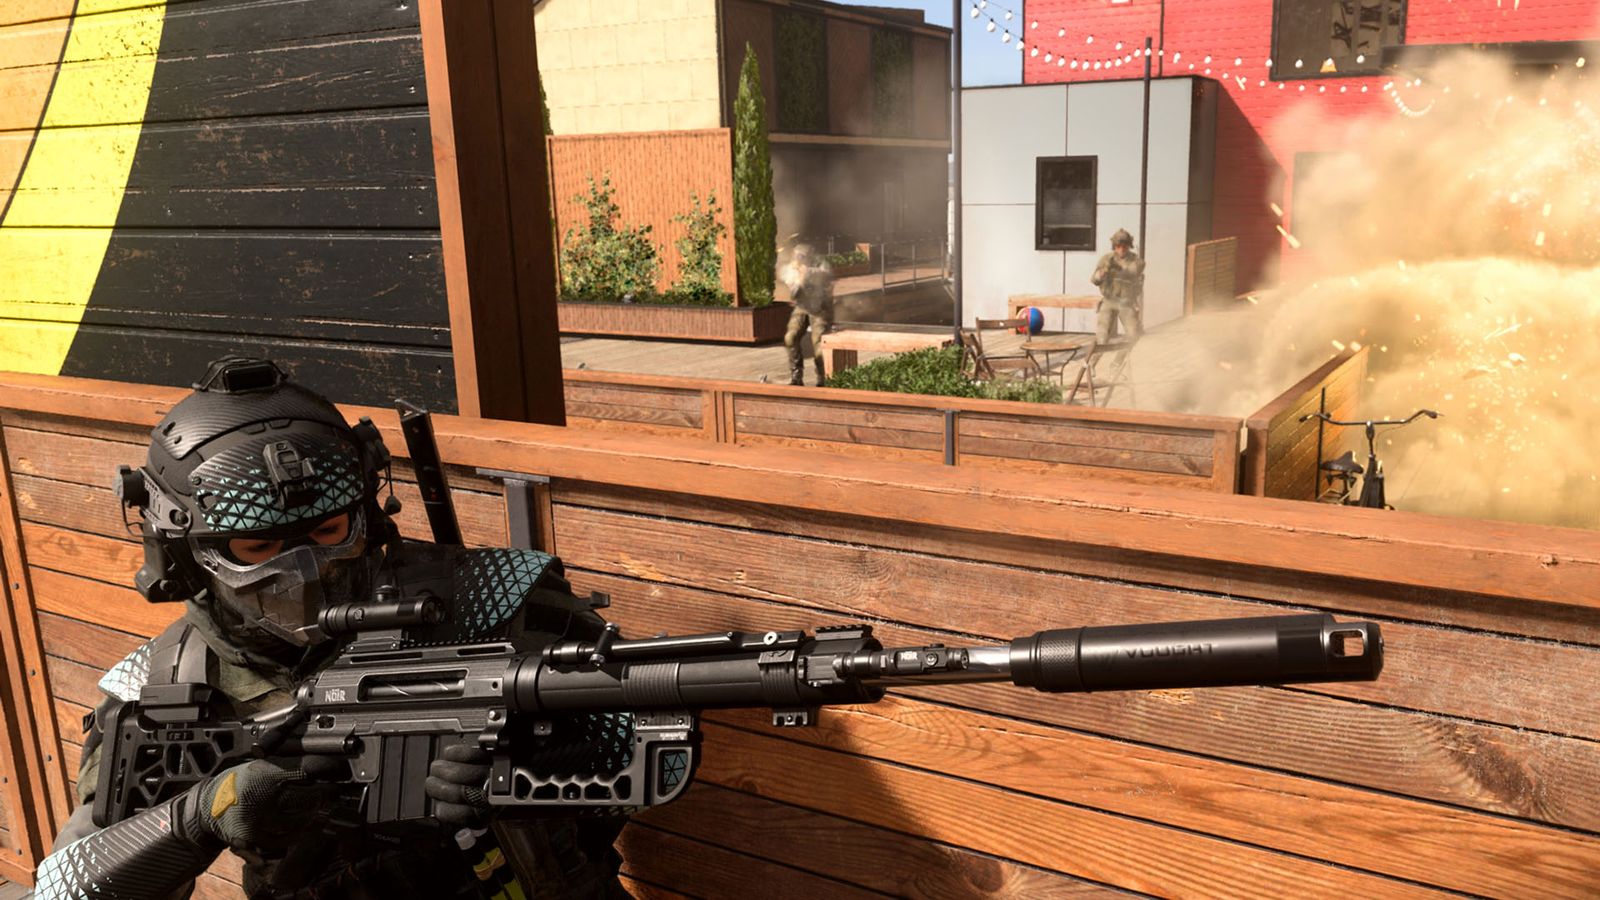 Screenshot of Modern Warfare 3 player taking cover while holding a rifle